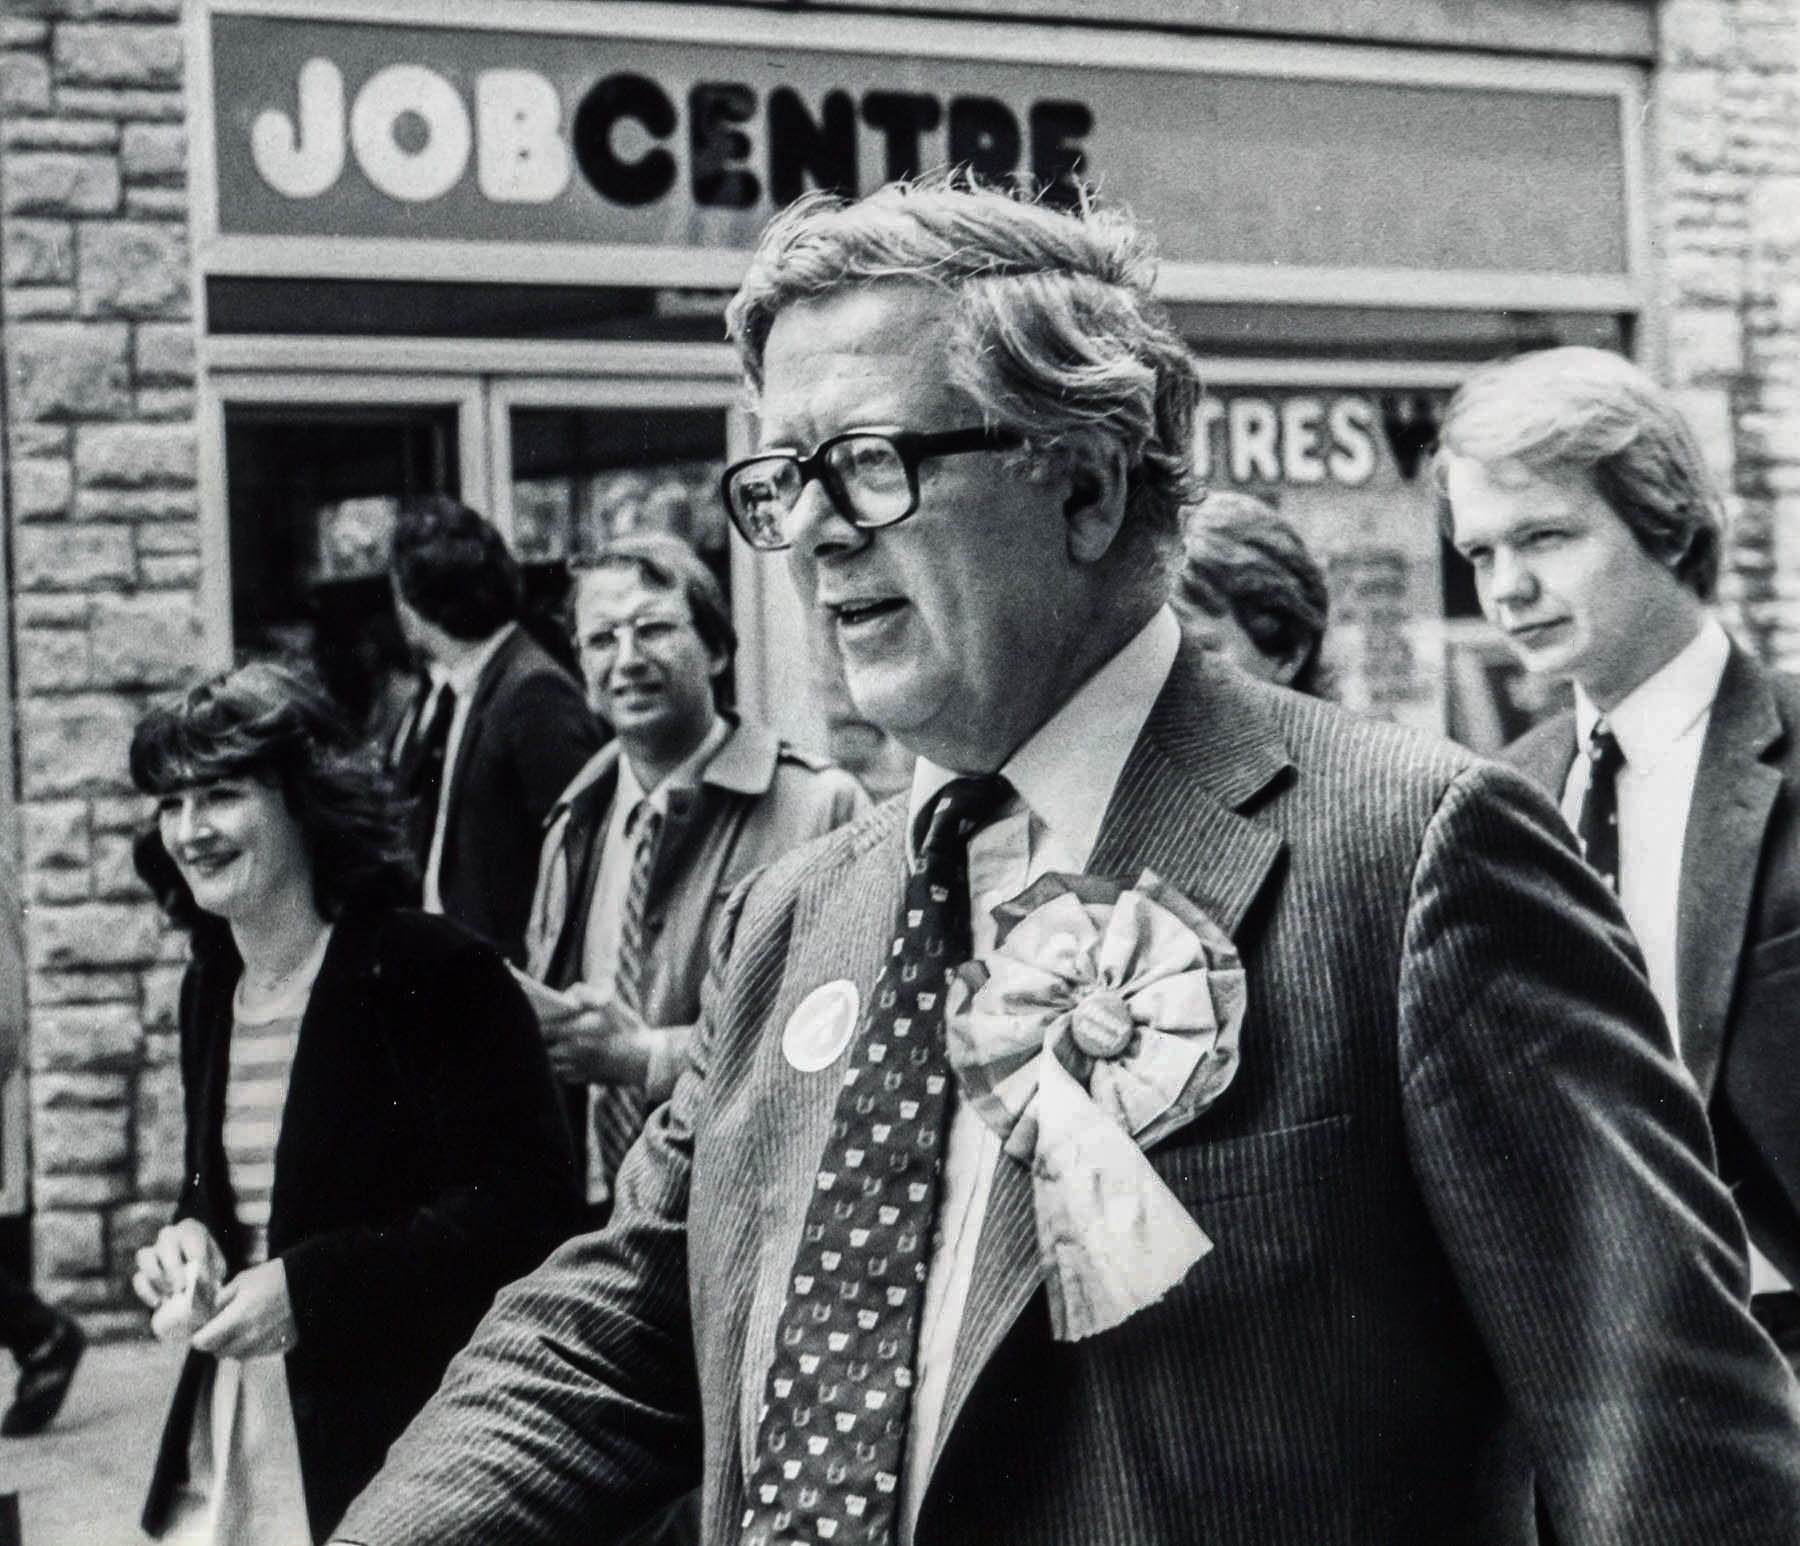 The then Chancellor Geoffrey Howe, with a young William Hague in tow